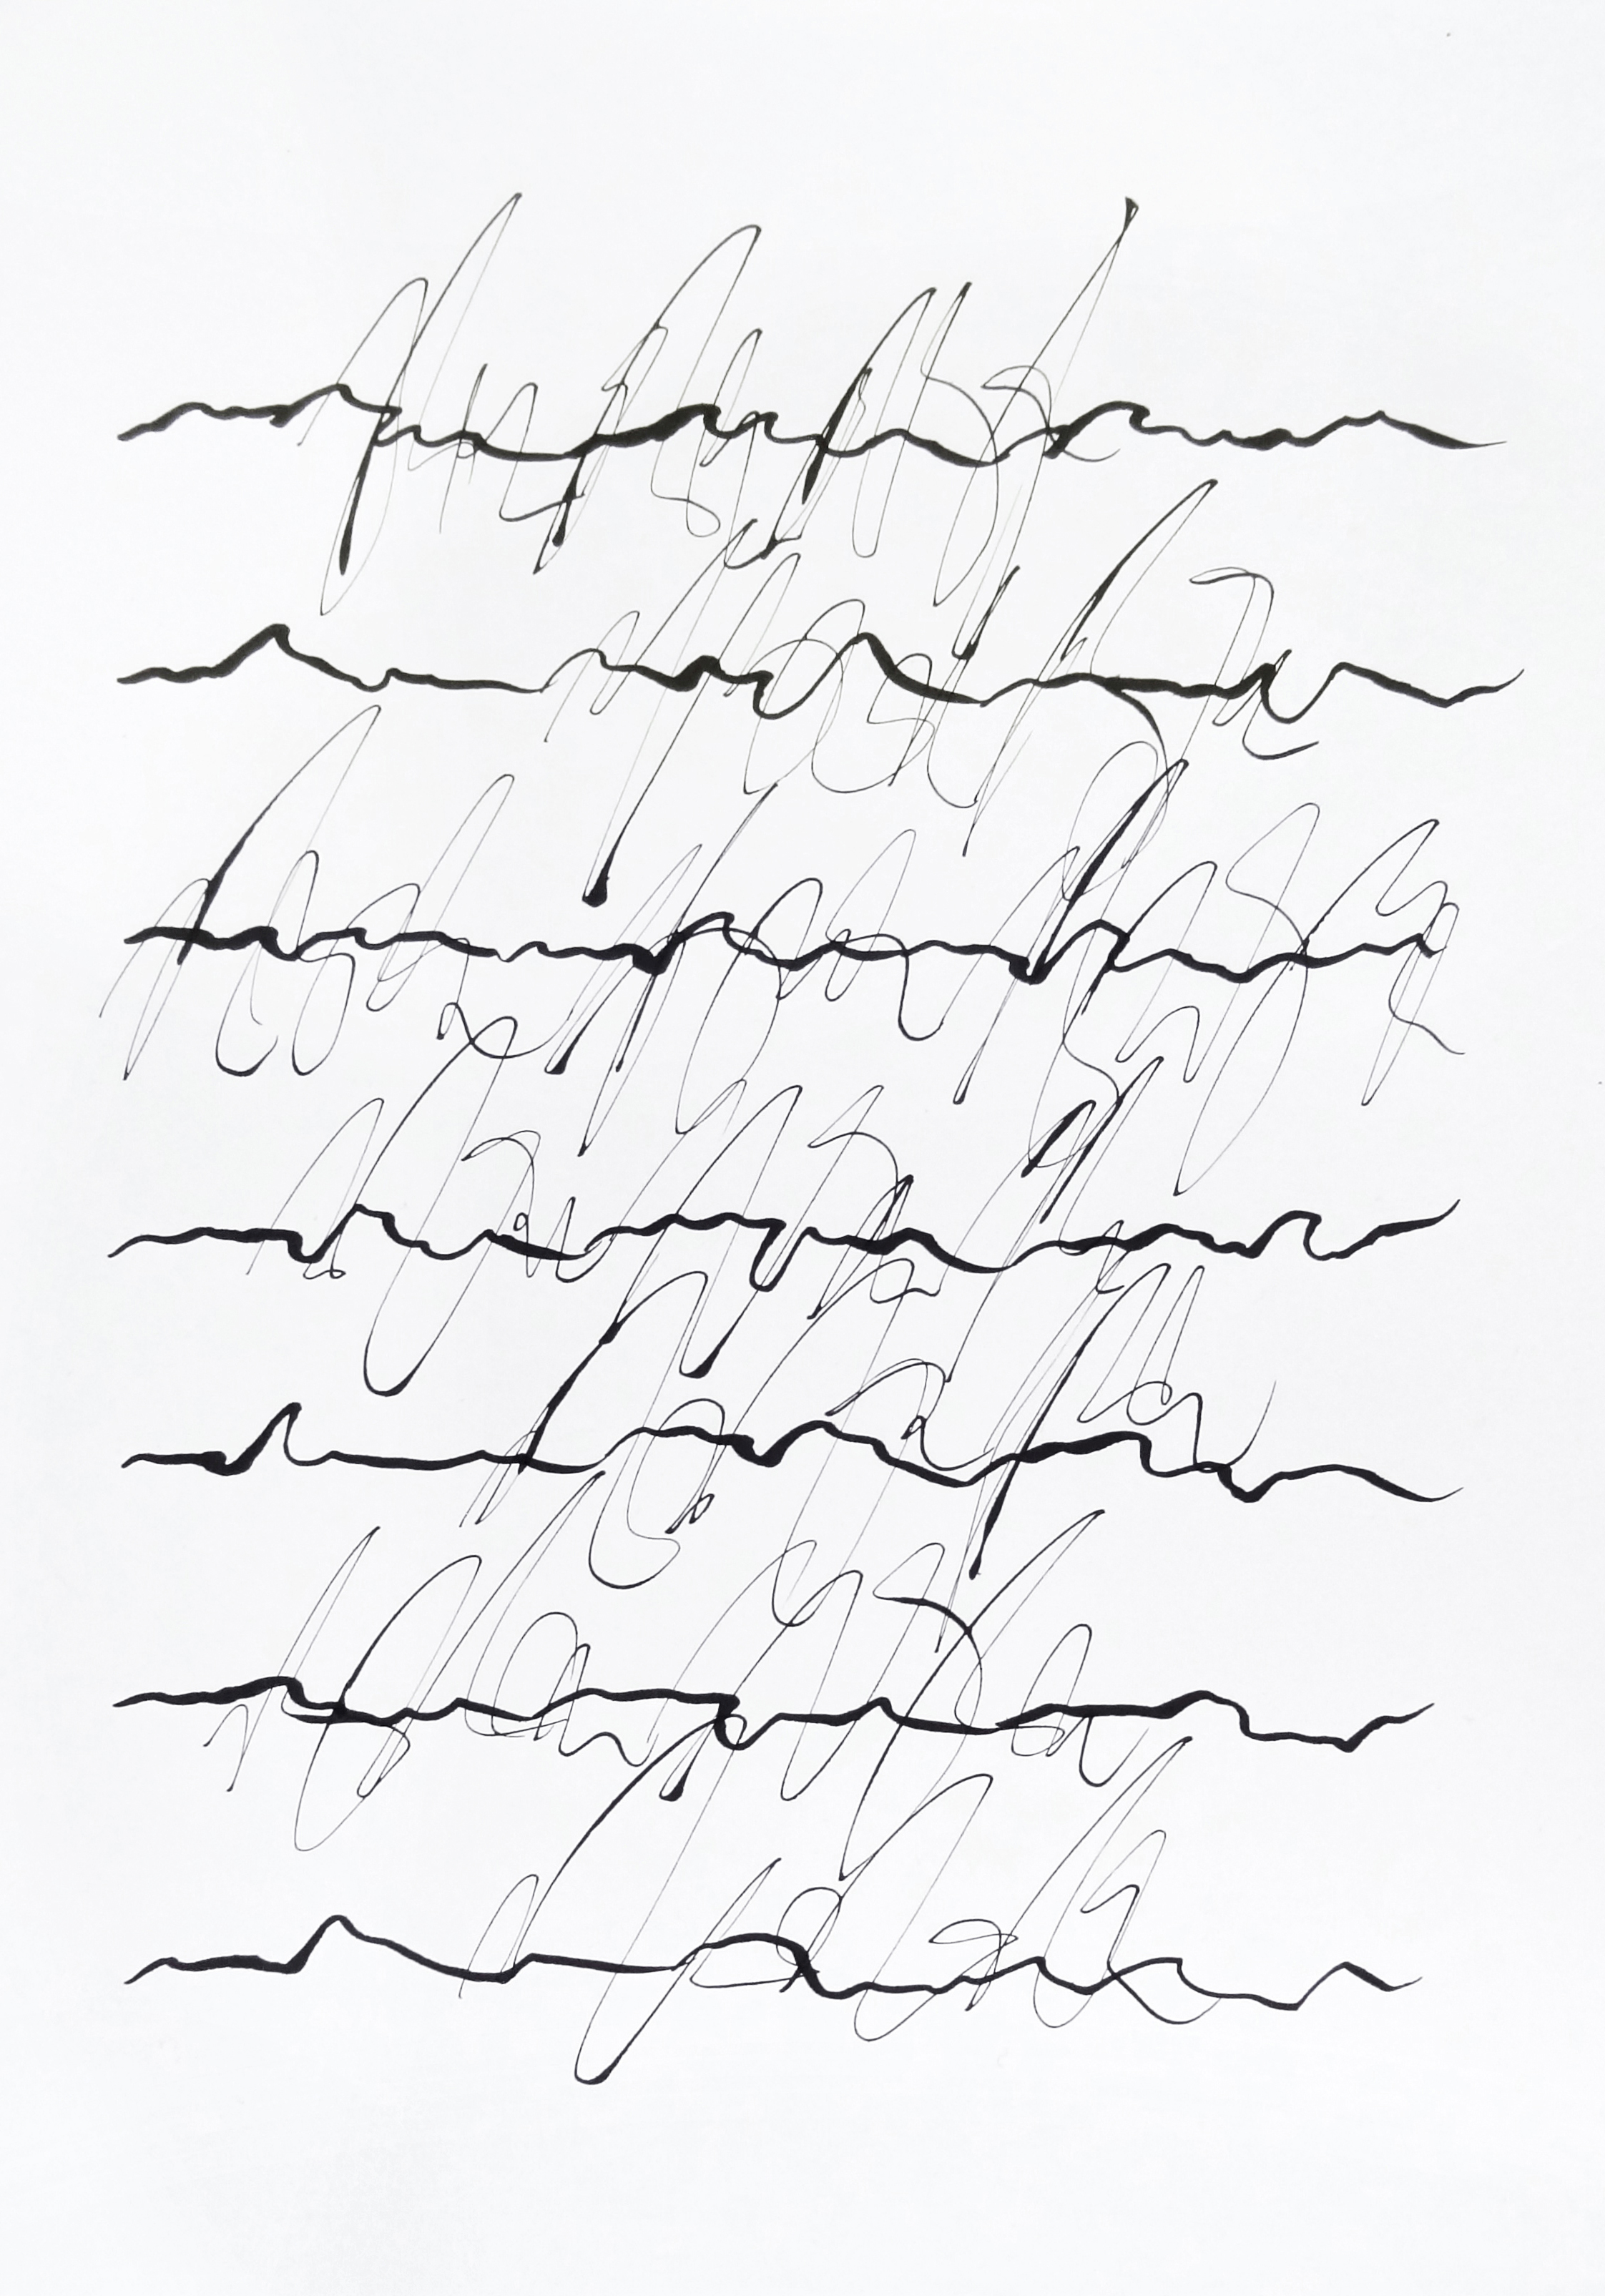  rhythm and flow studies, 2019 calligraphy ink on paper 42,0 x 29,7 cm (1-19) 